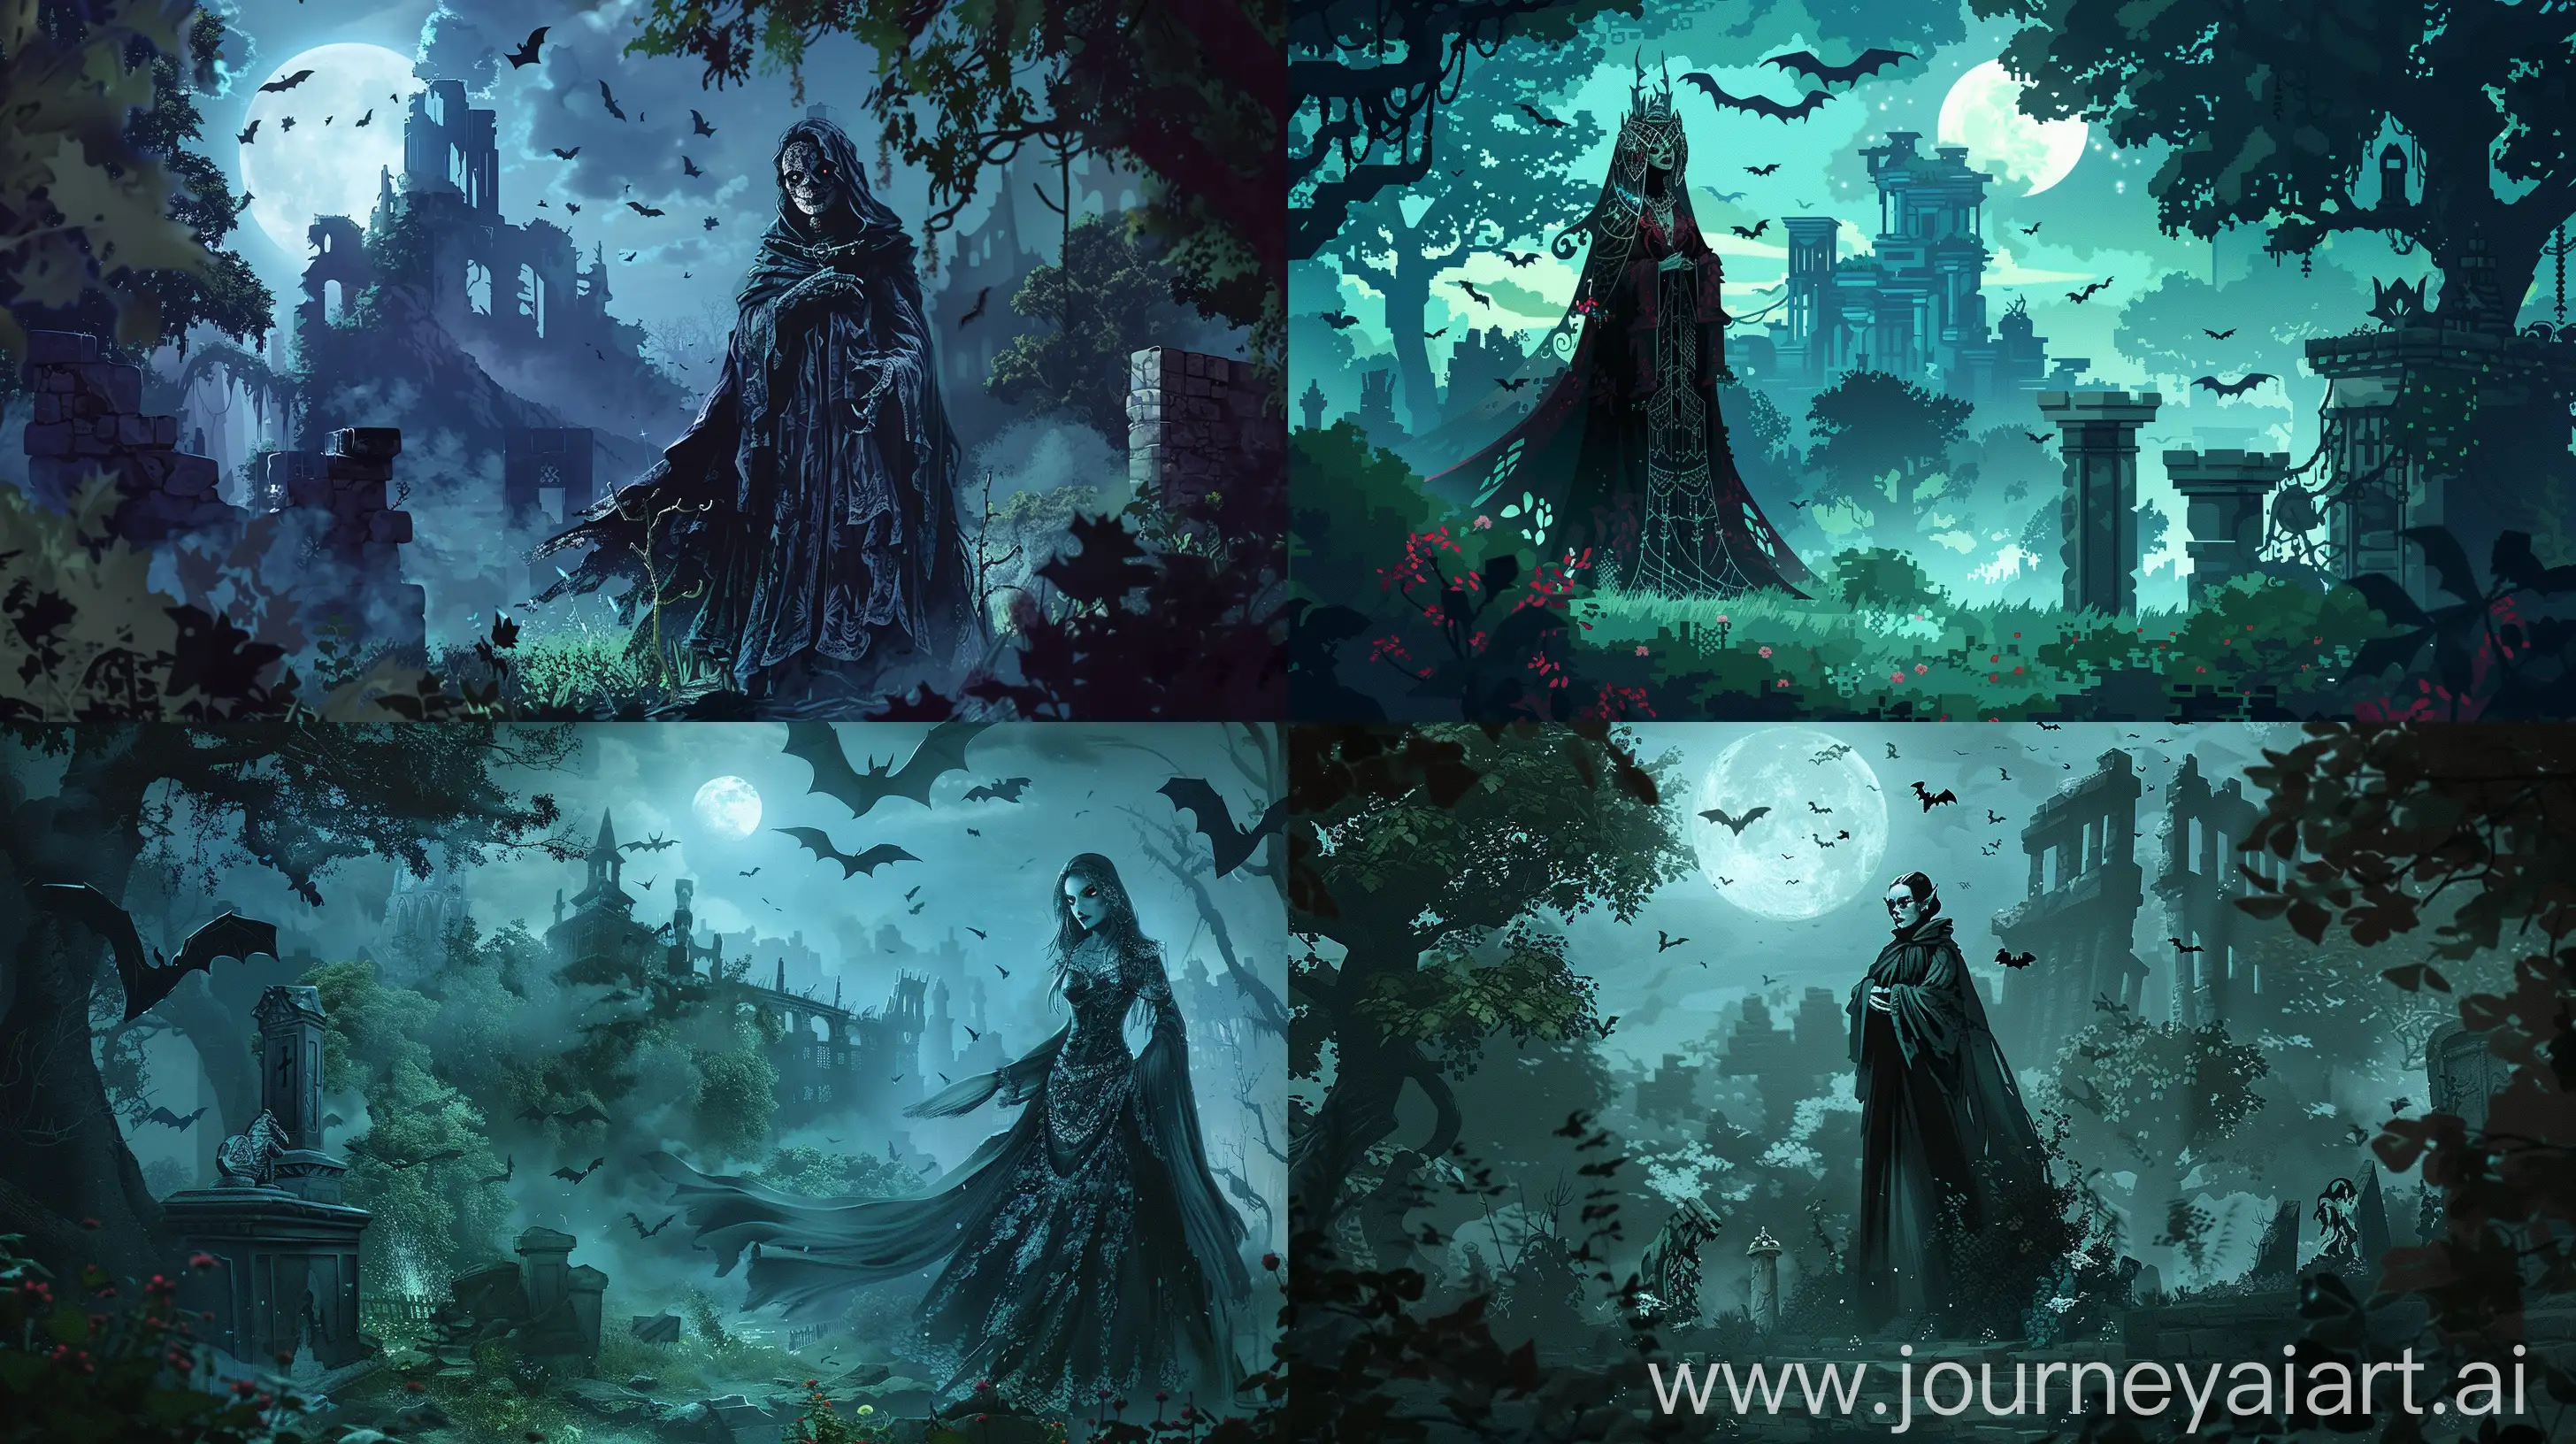 An elaborate illustration depicting a dark, mystical scene within the Minecraft universe, showcasing the integration of the Vampires mod. The composition centers around a hauntingly beautiful vampire character, draped in elegant attire, standing amidst an eerie forest illuminated by a pale moonlight. Surrounding the vampire are various elements indicative of the mod's features, such as vampire bats fluttering overhead, eerie fog enveloping the landscape, and cryptic ruins in the background. The vampire's gaze exudes an aura of mystery and allure, while the environment evokes a sense of foreboding and intrigue. The illustration captures the essence of gameplay with the mod, highlighting its atmospheric and immersive qualities without the need for textual cues. --ar 16:9 